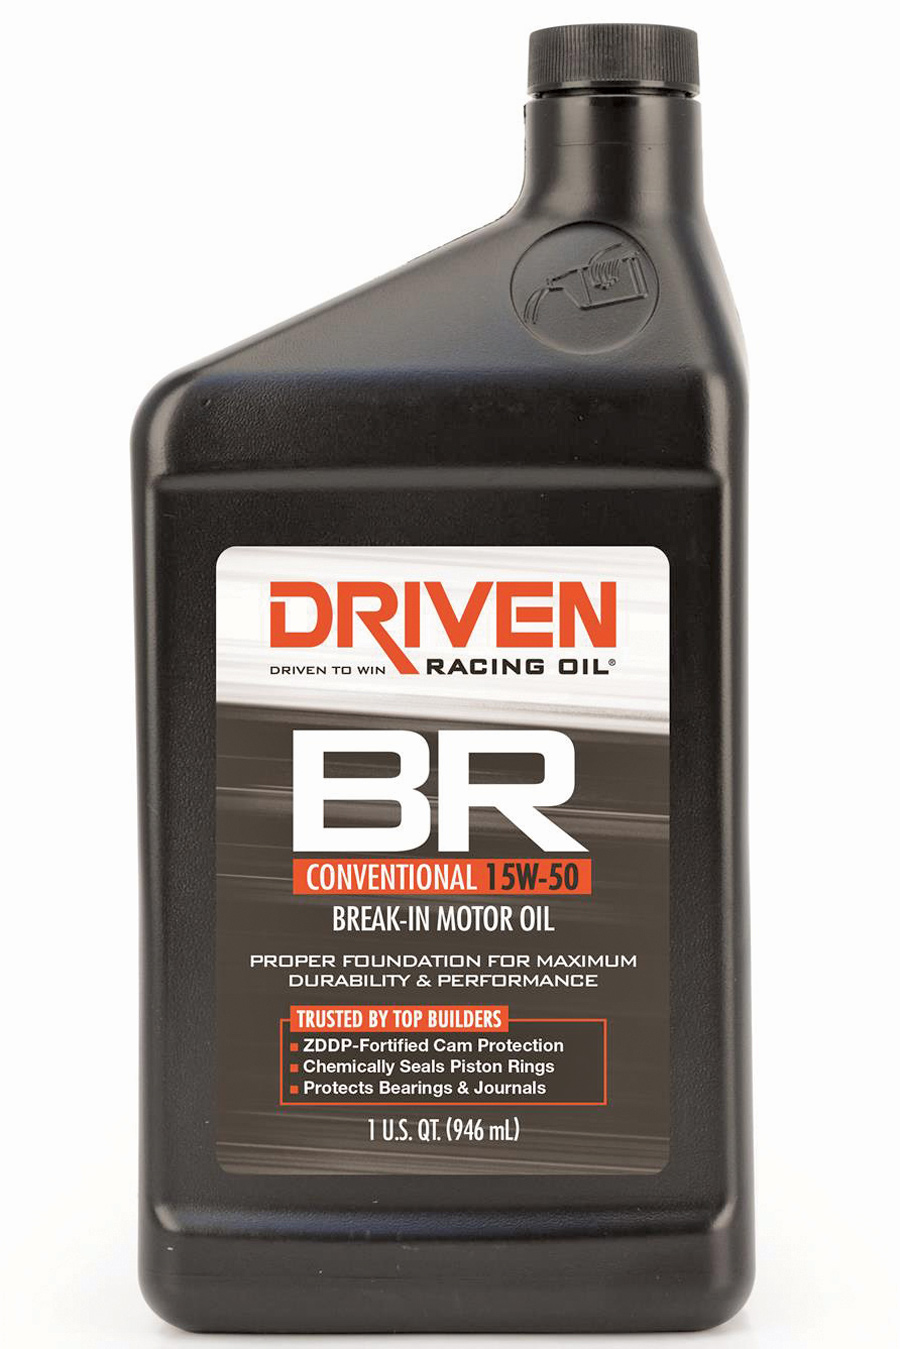 A proper break-in oil such as this formula from Driven is a great way to ensure first startup goes as planned